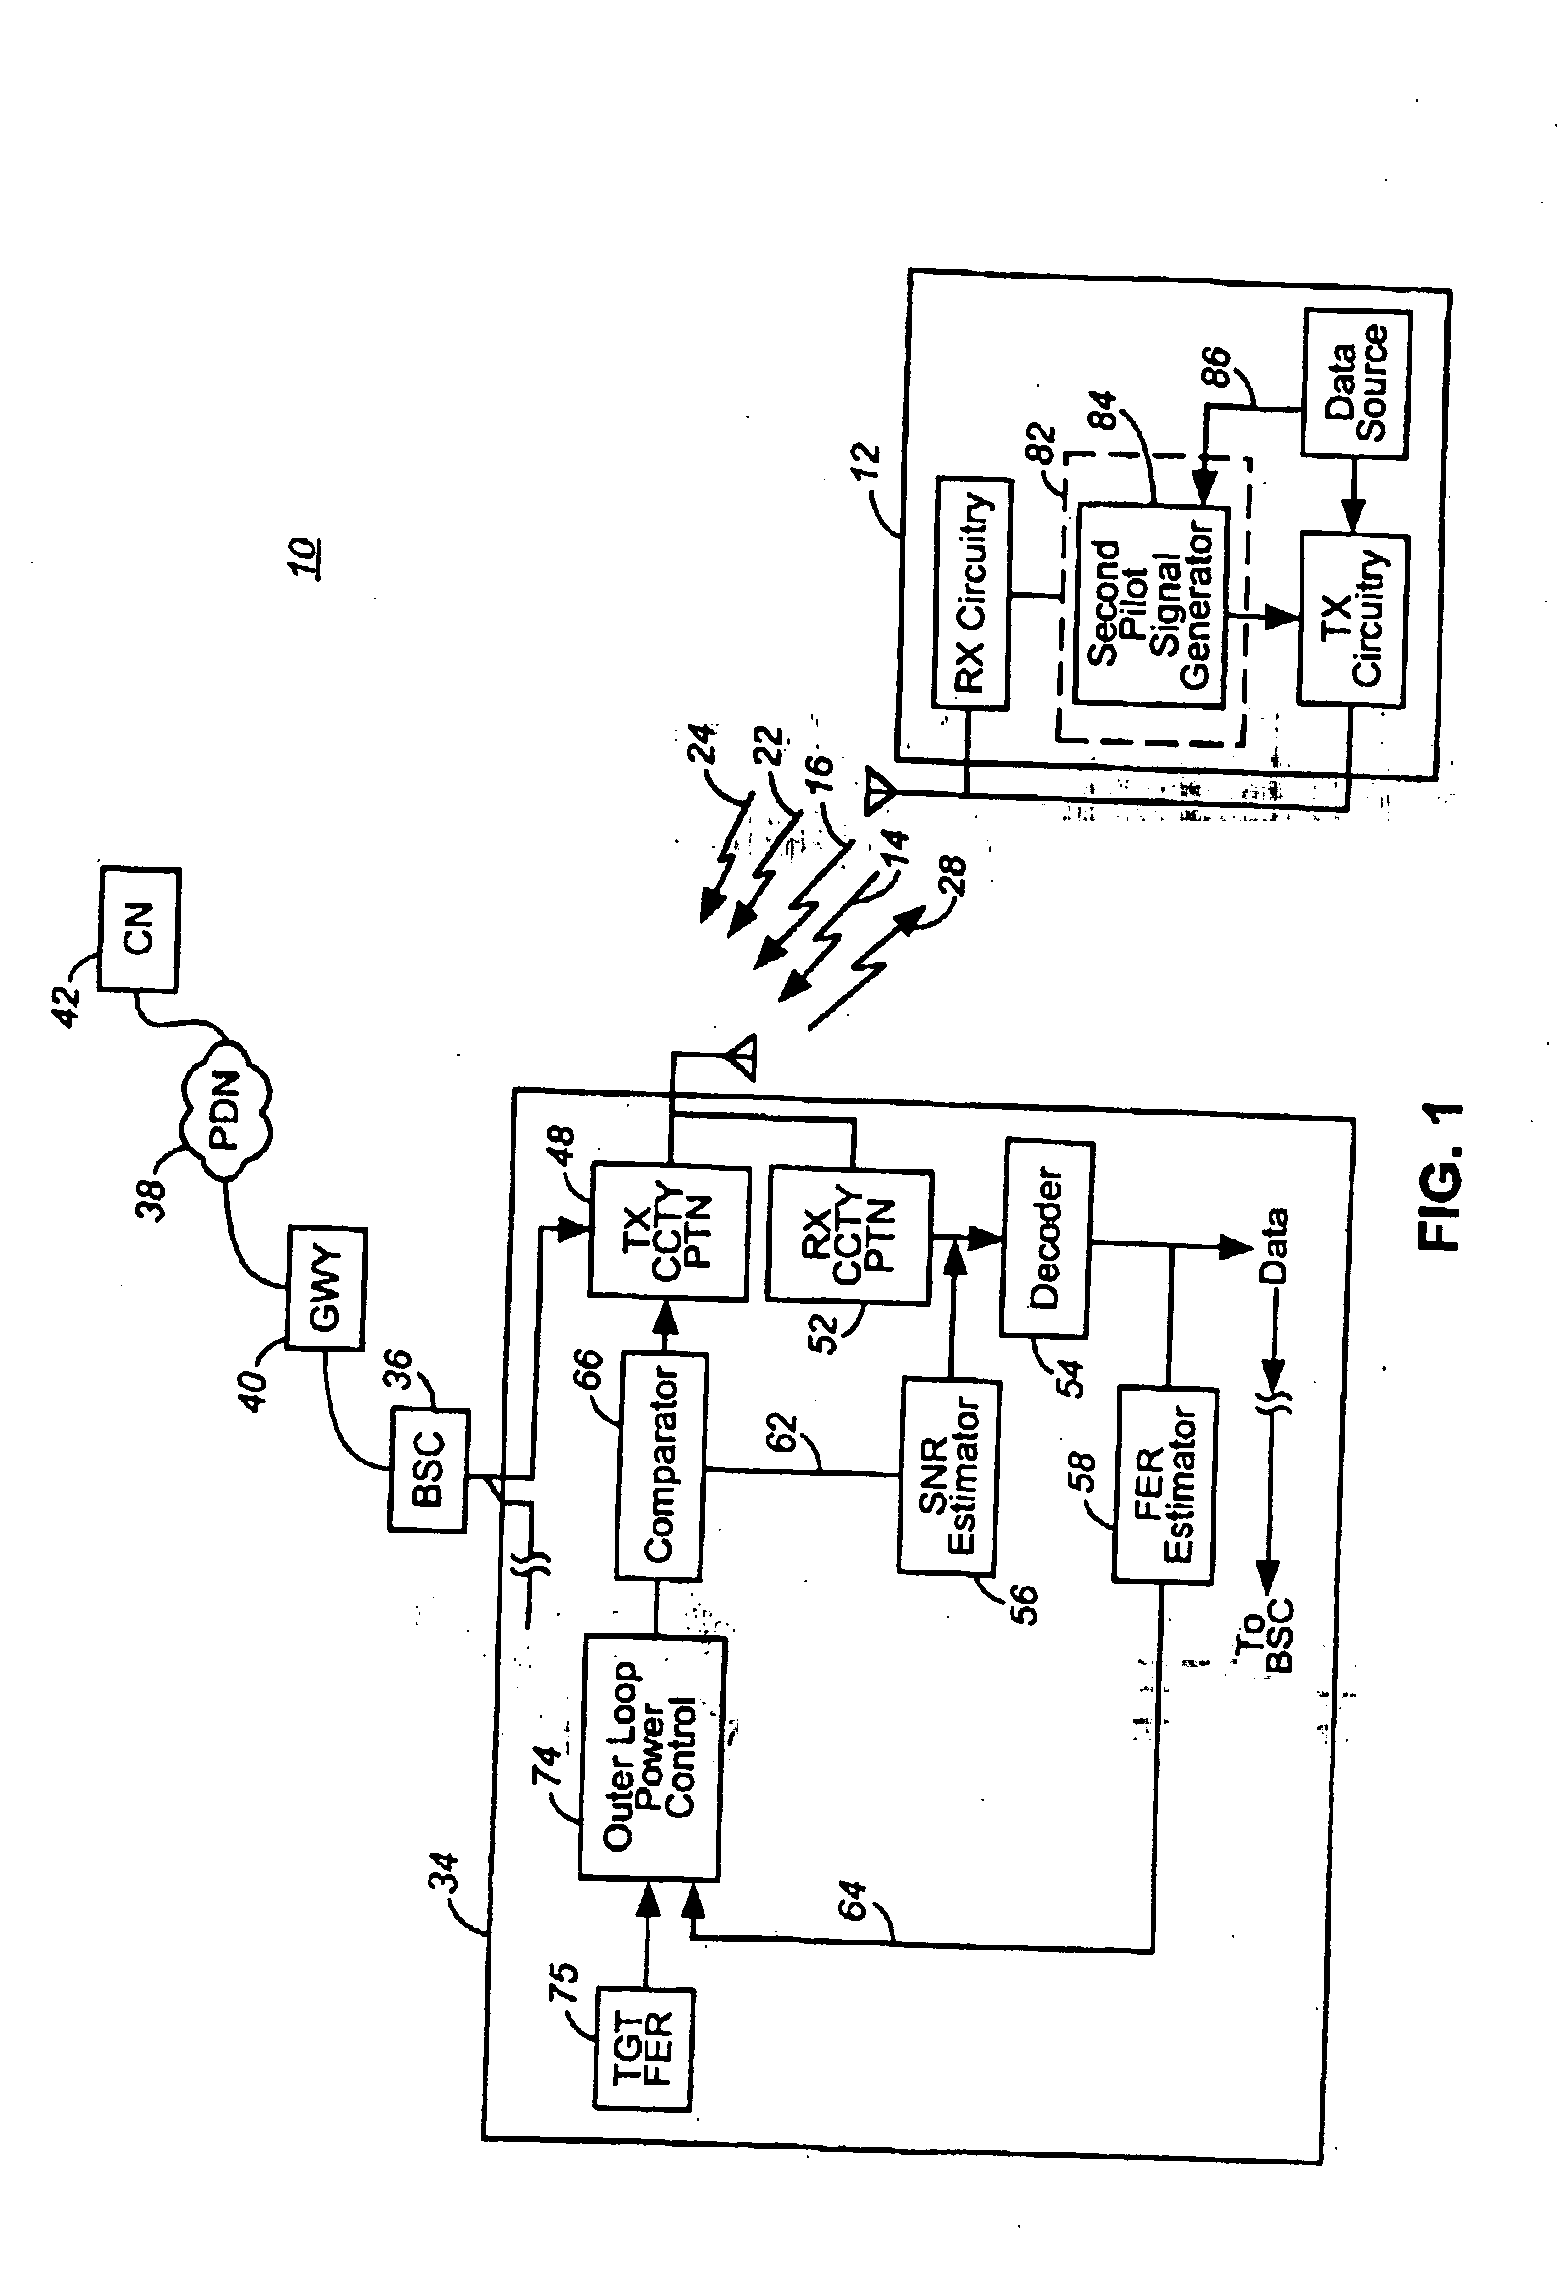 Apparatus and an associated method for facilitating communications in a radio communication system that provides for data communications at multiple data rates